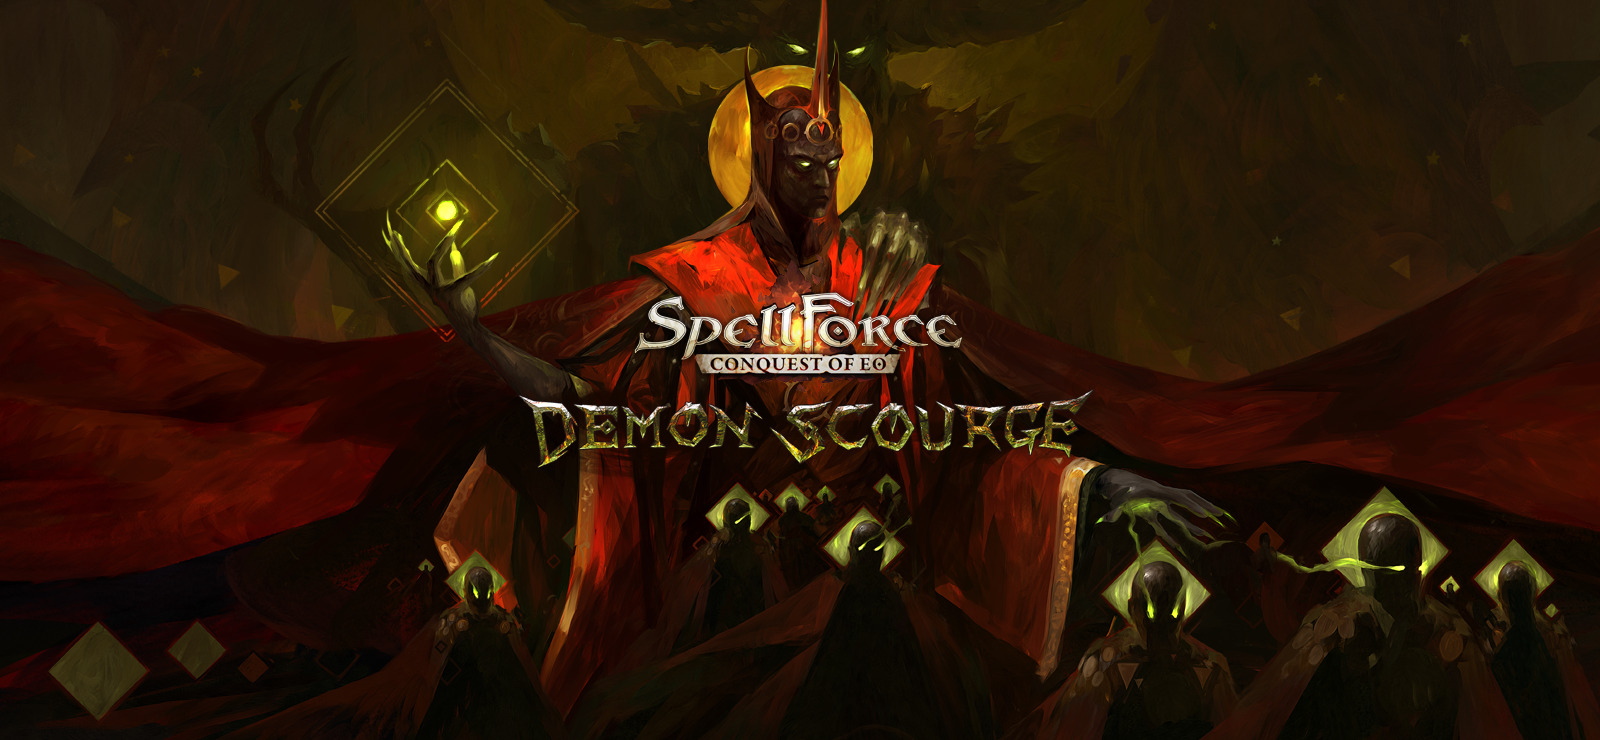 Jogo SpellForce: Conquest of Eo - Demon Scourge - PC GOG